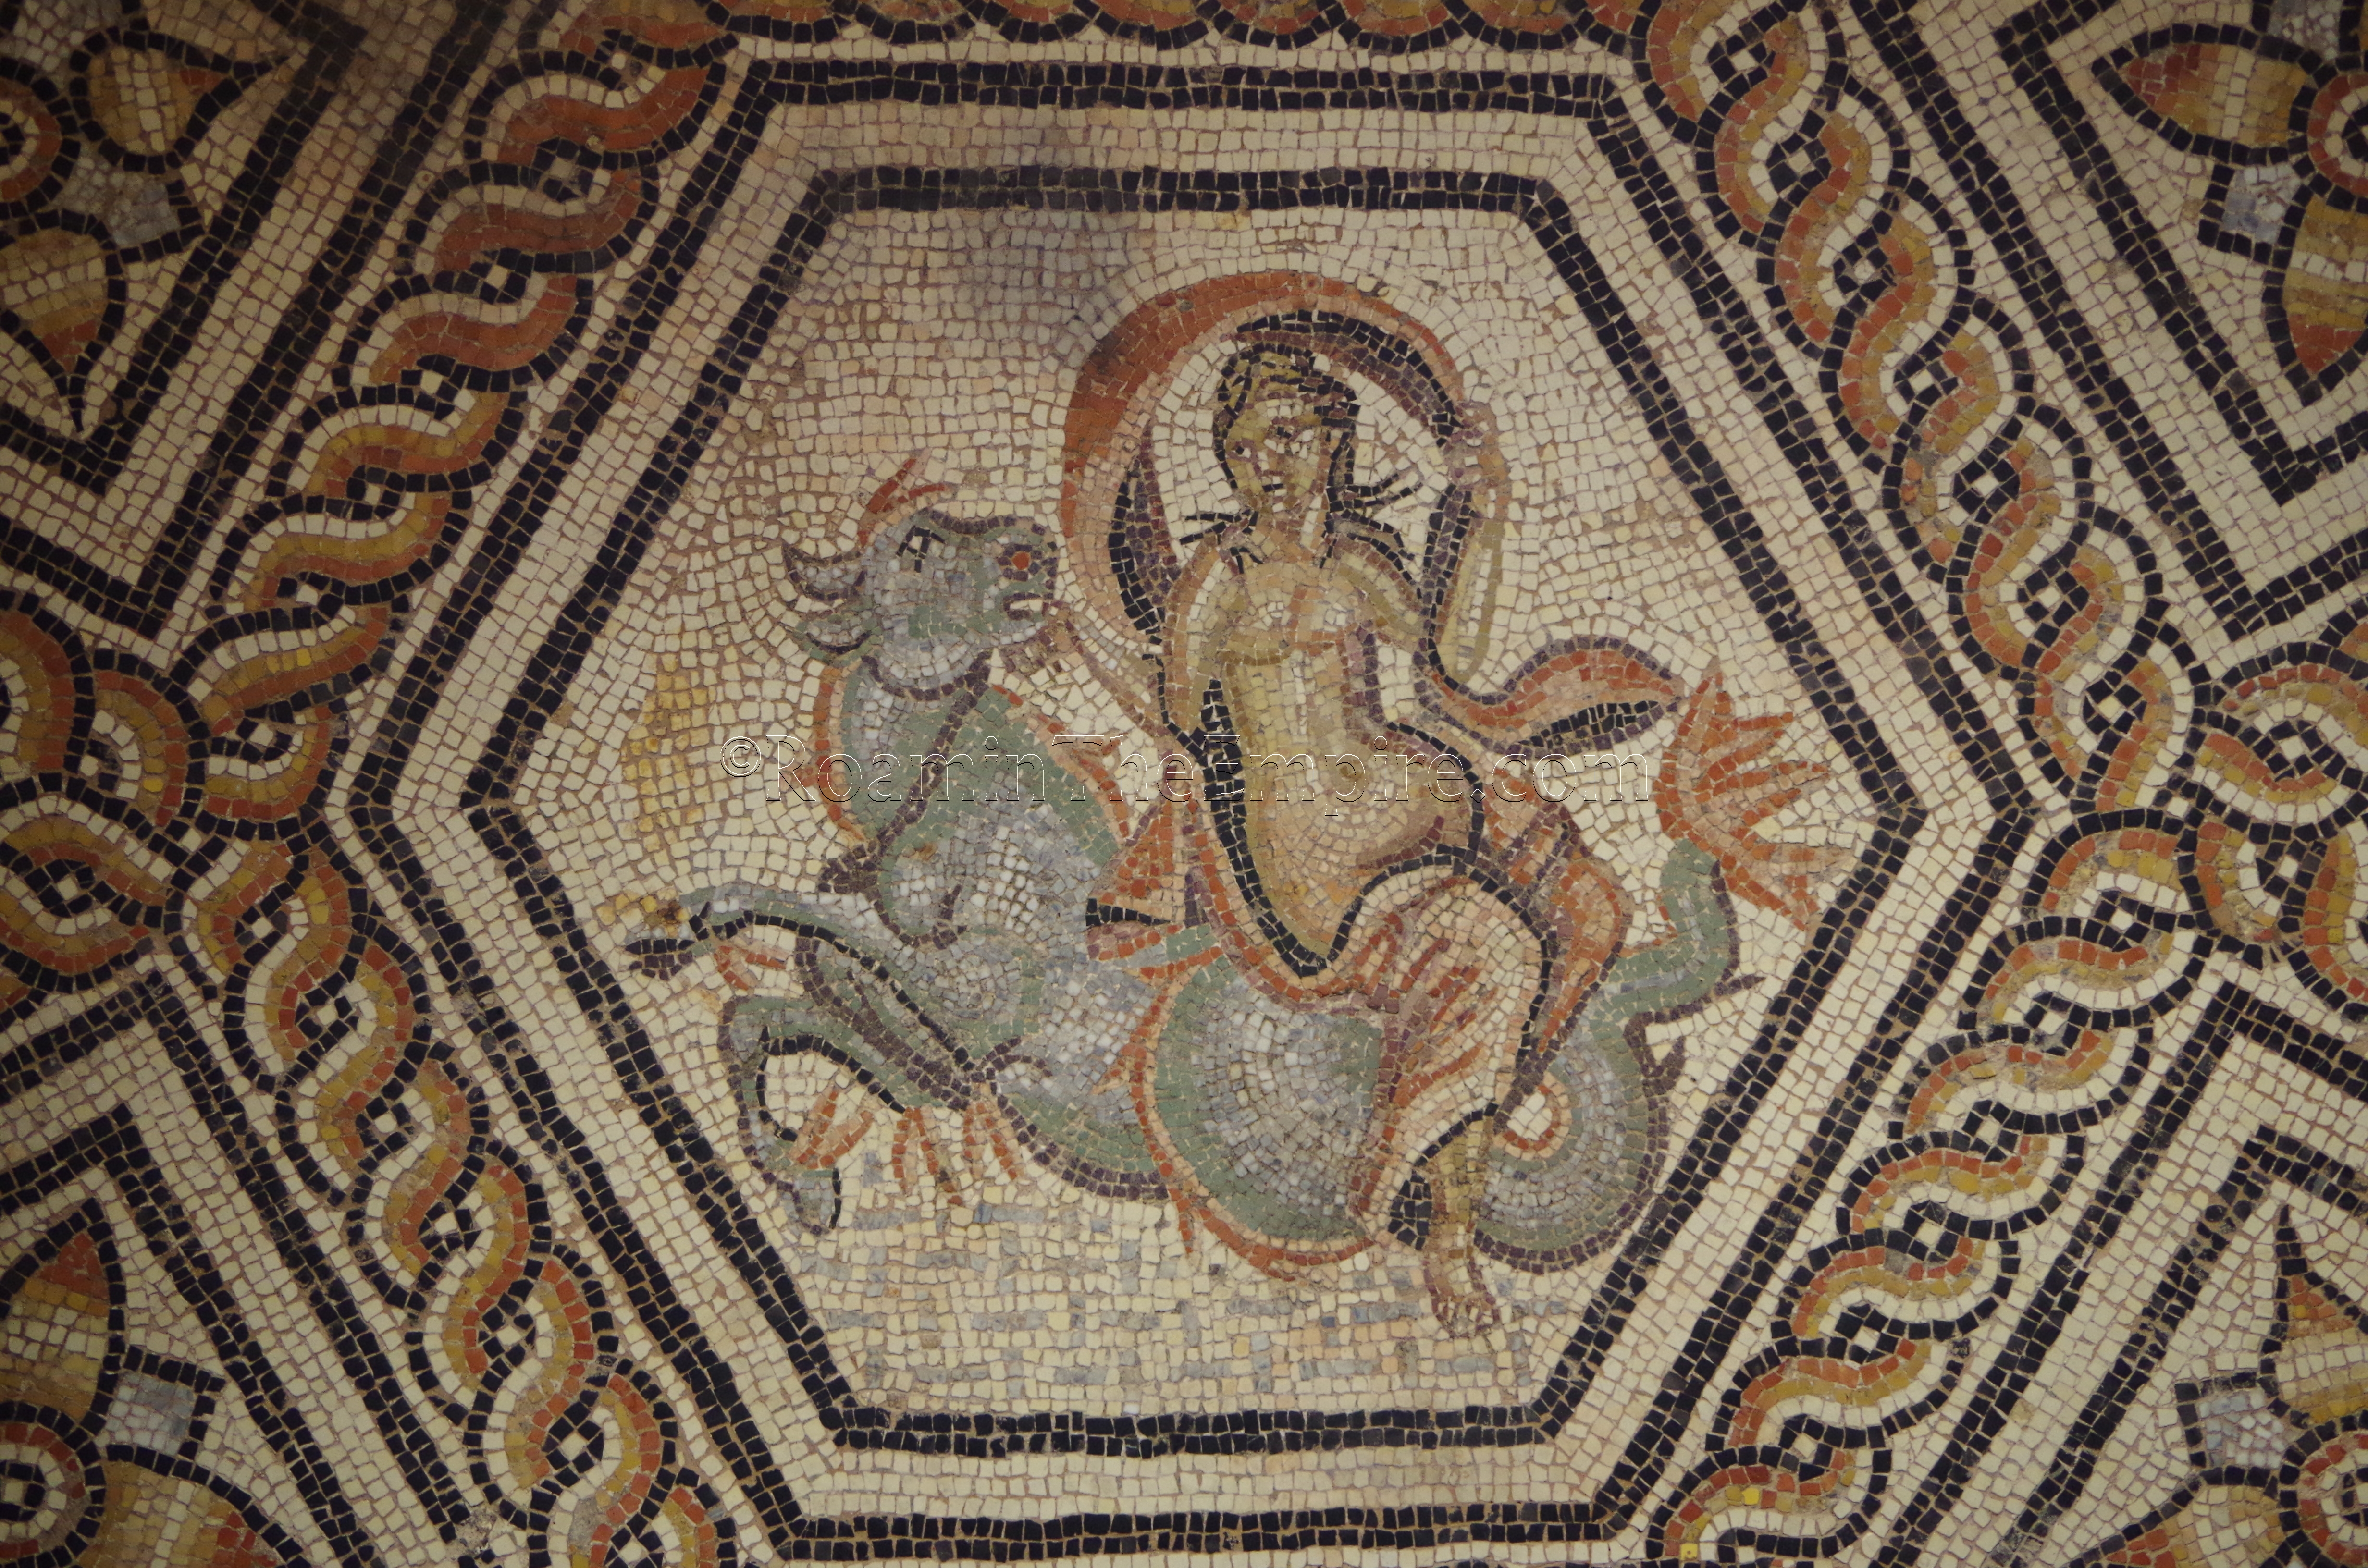 Mosaic of Europa and the bull in the Musée de la Romanité, Nîmes.